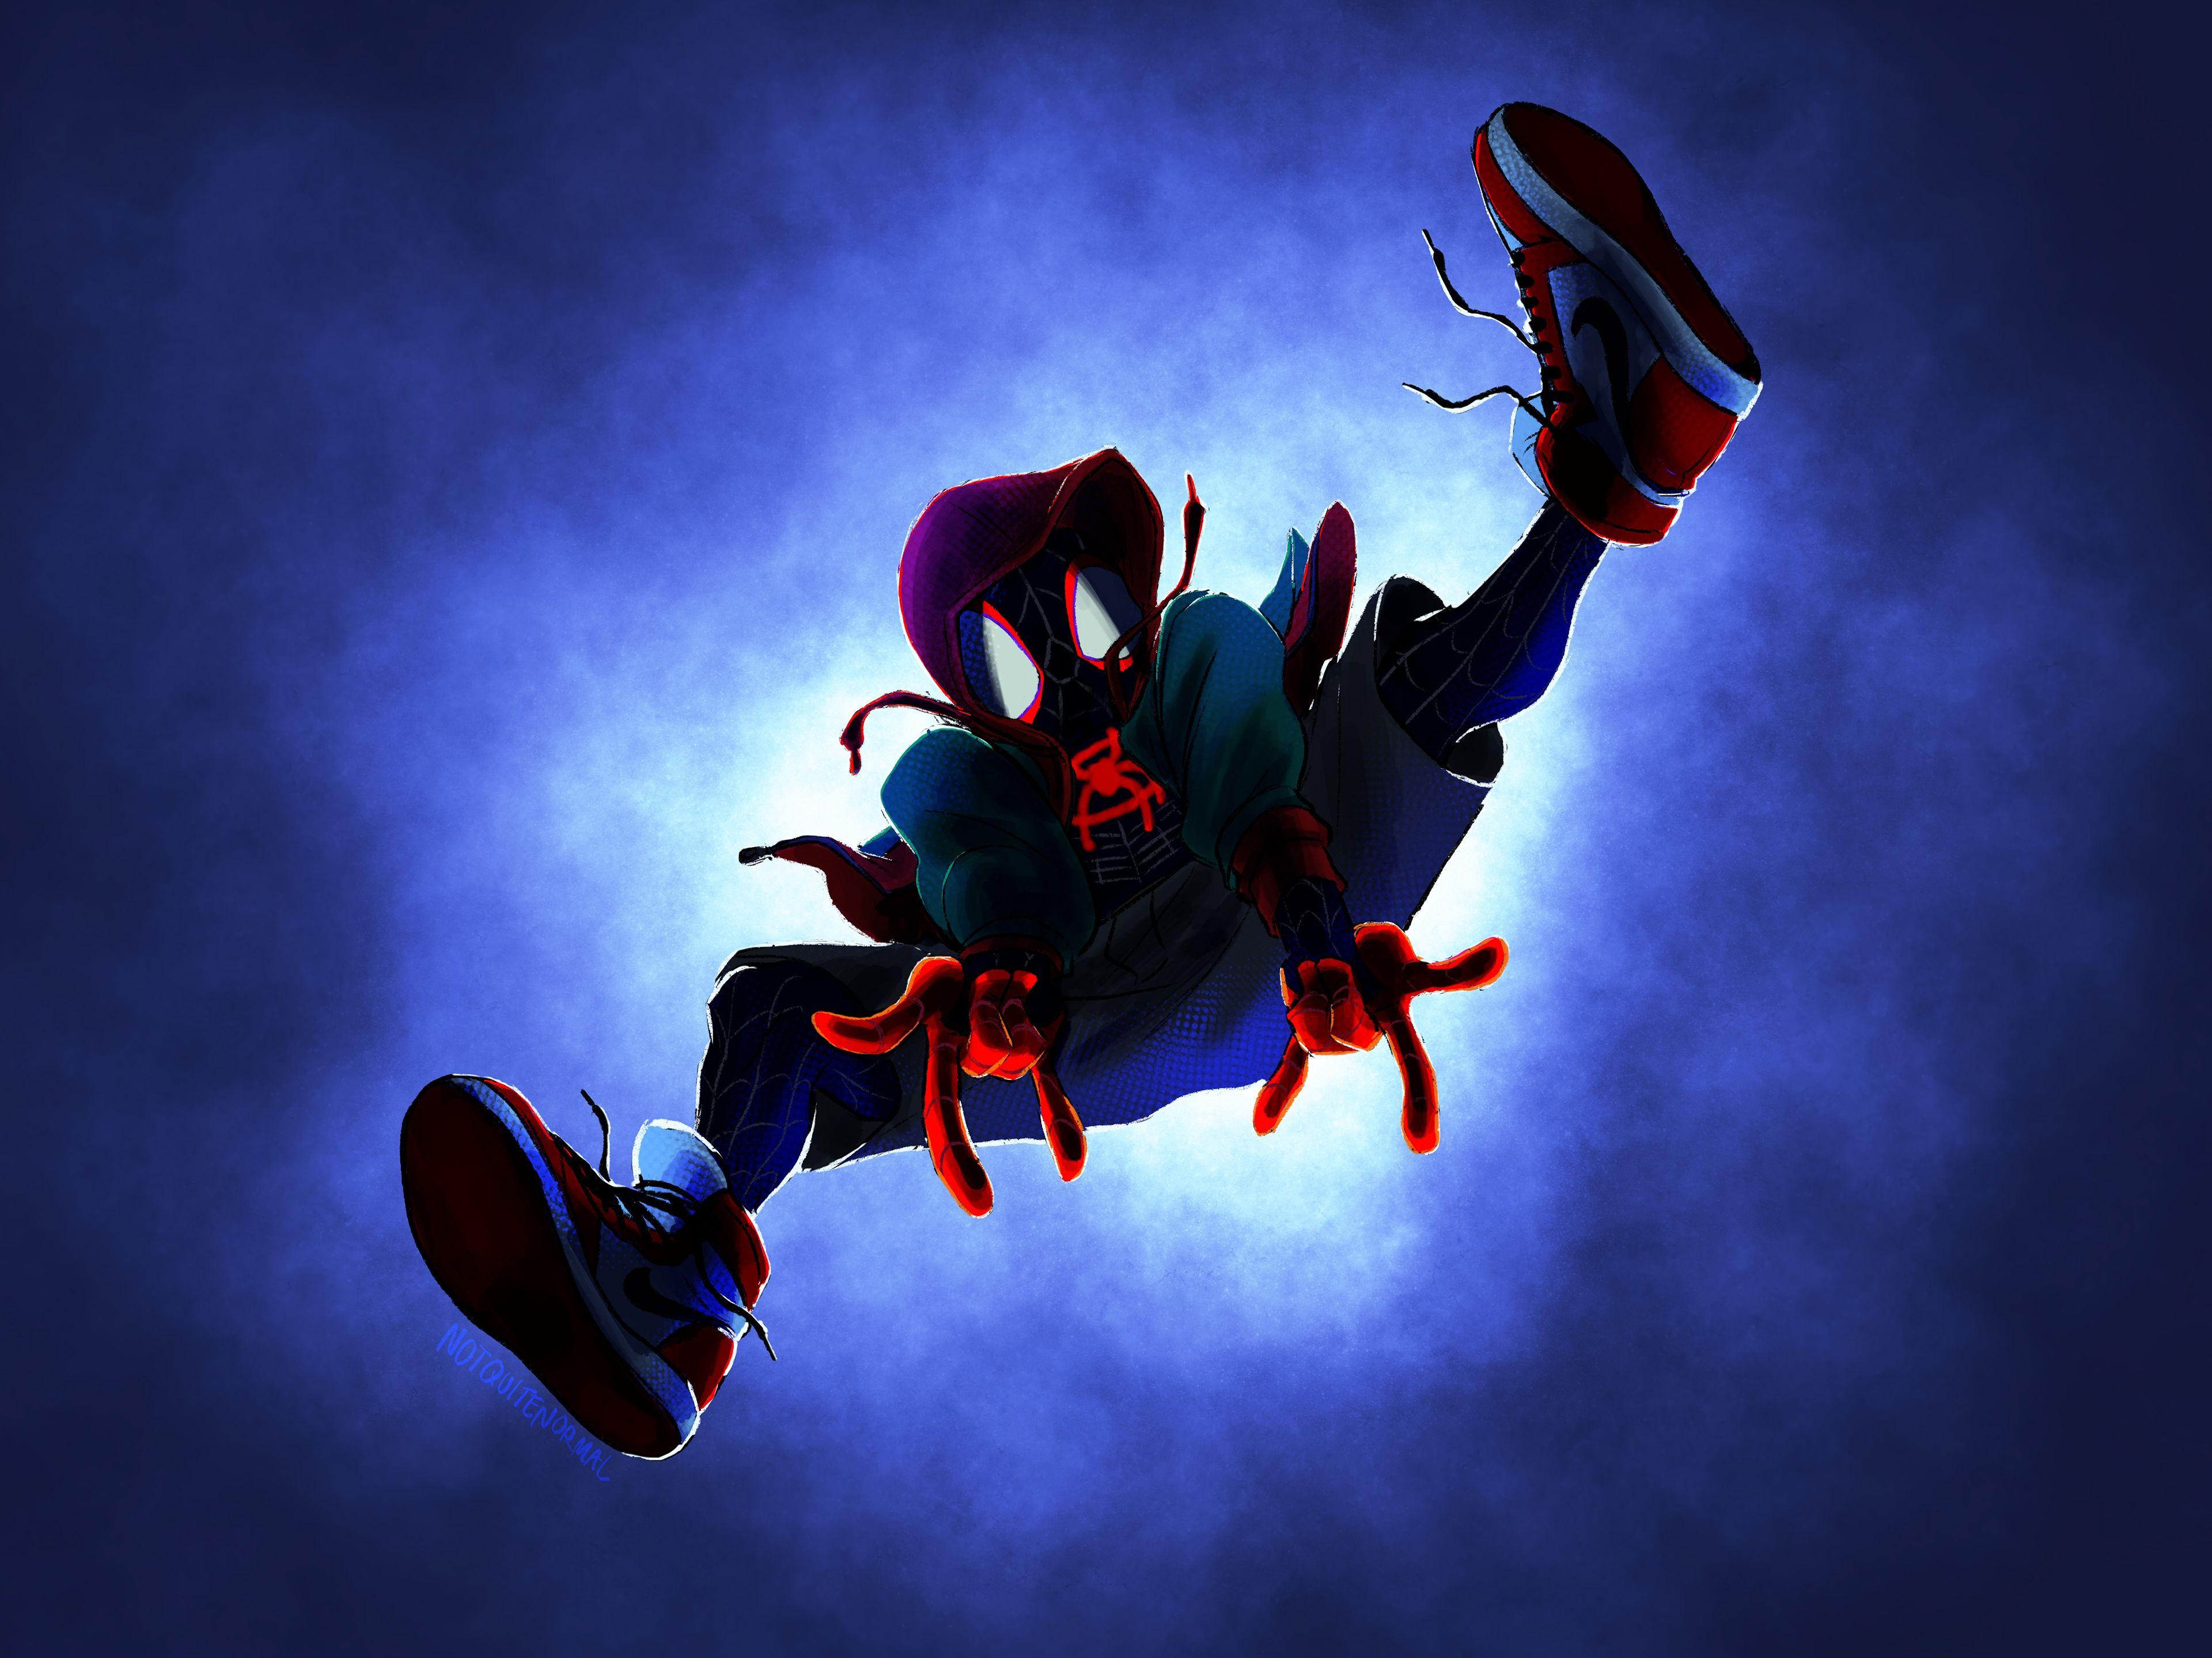 Cool Spiderman Into The Spider Verse Wallpapers / Here is some of my ...